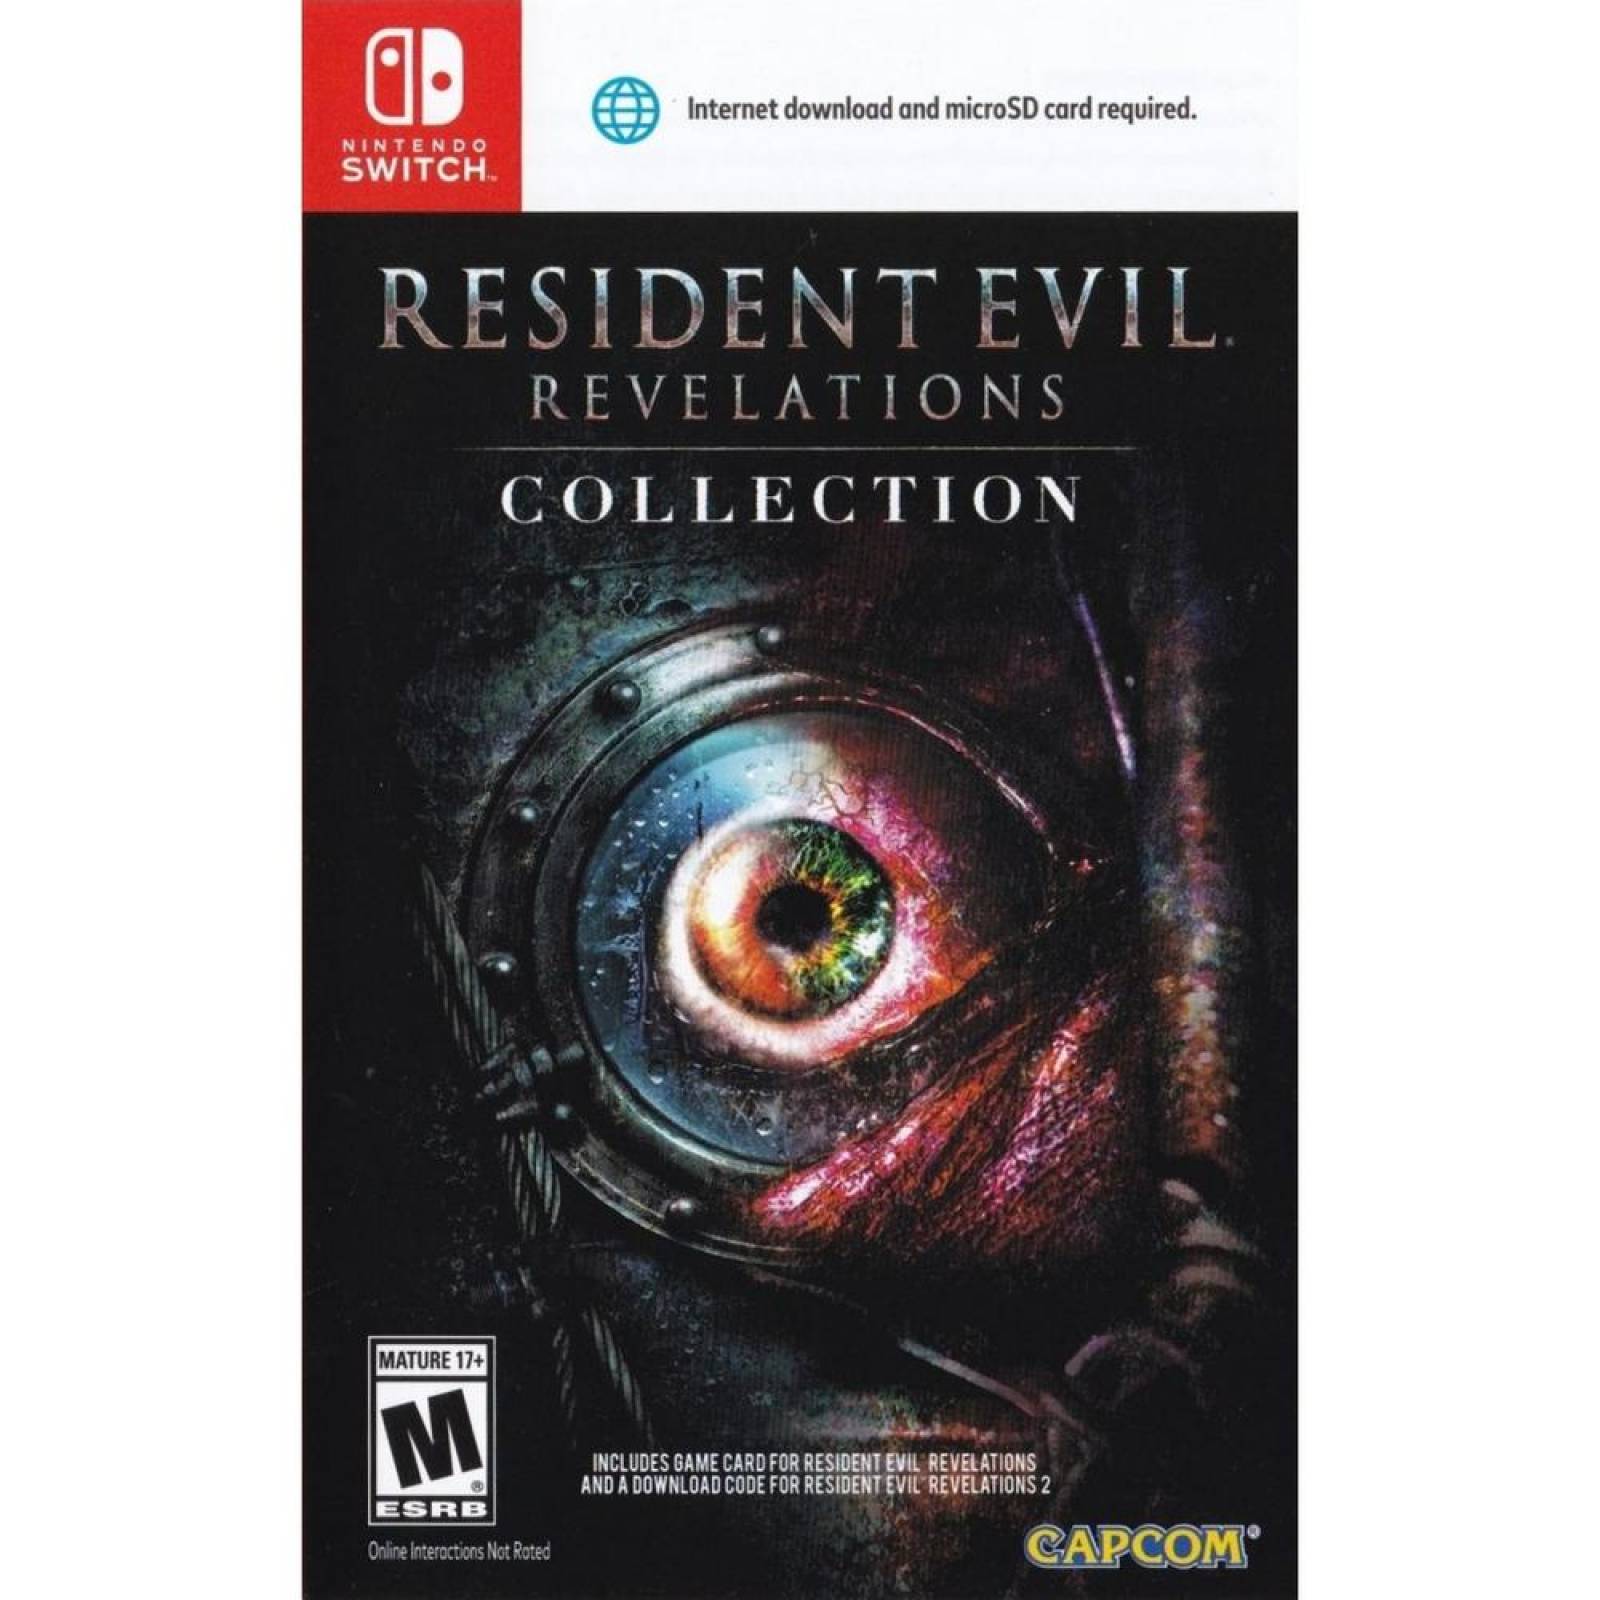 Resident Evil Revelations Collection Nintendo Switch - S001 